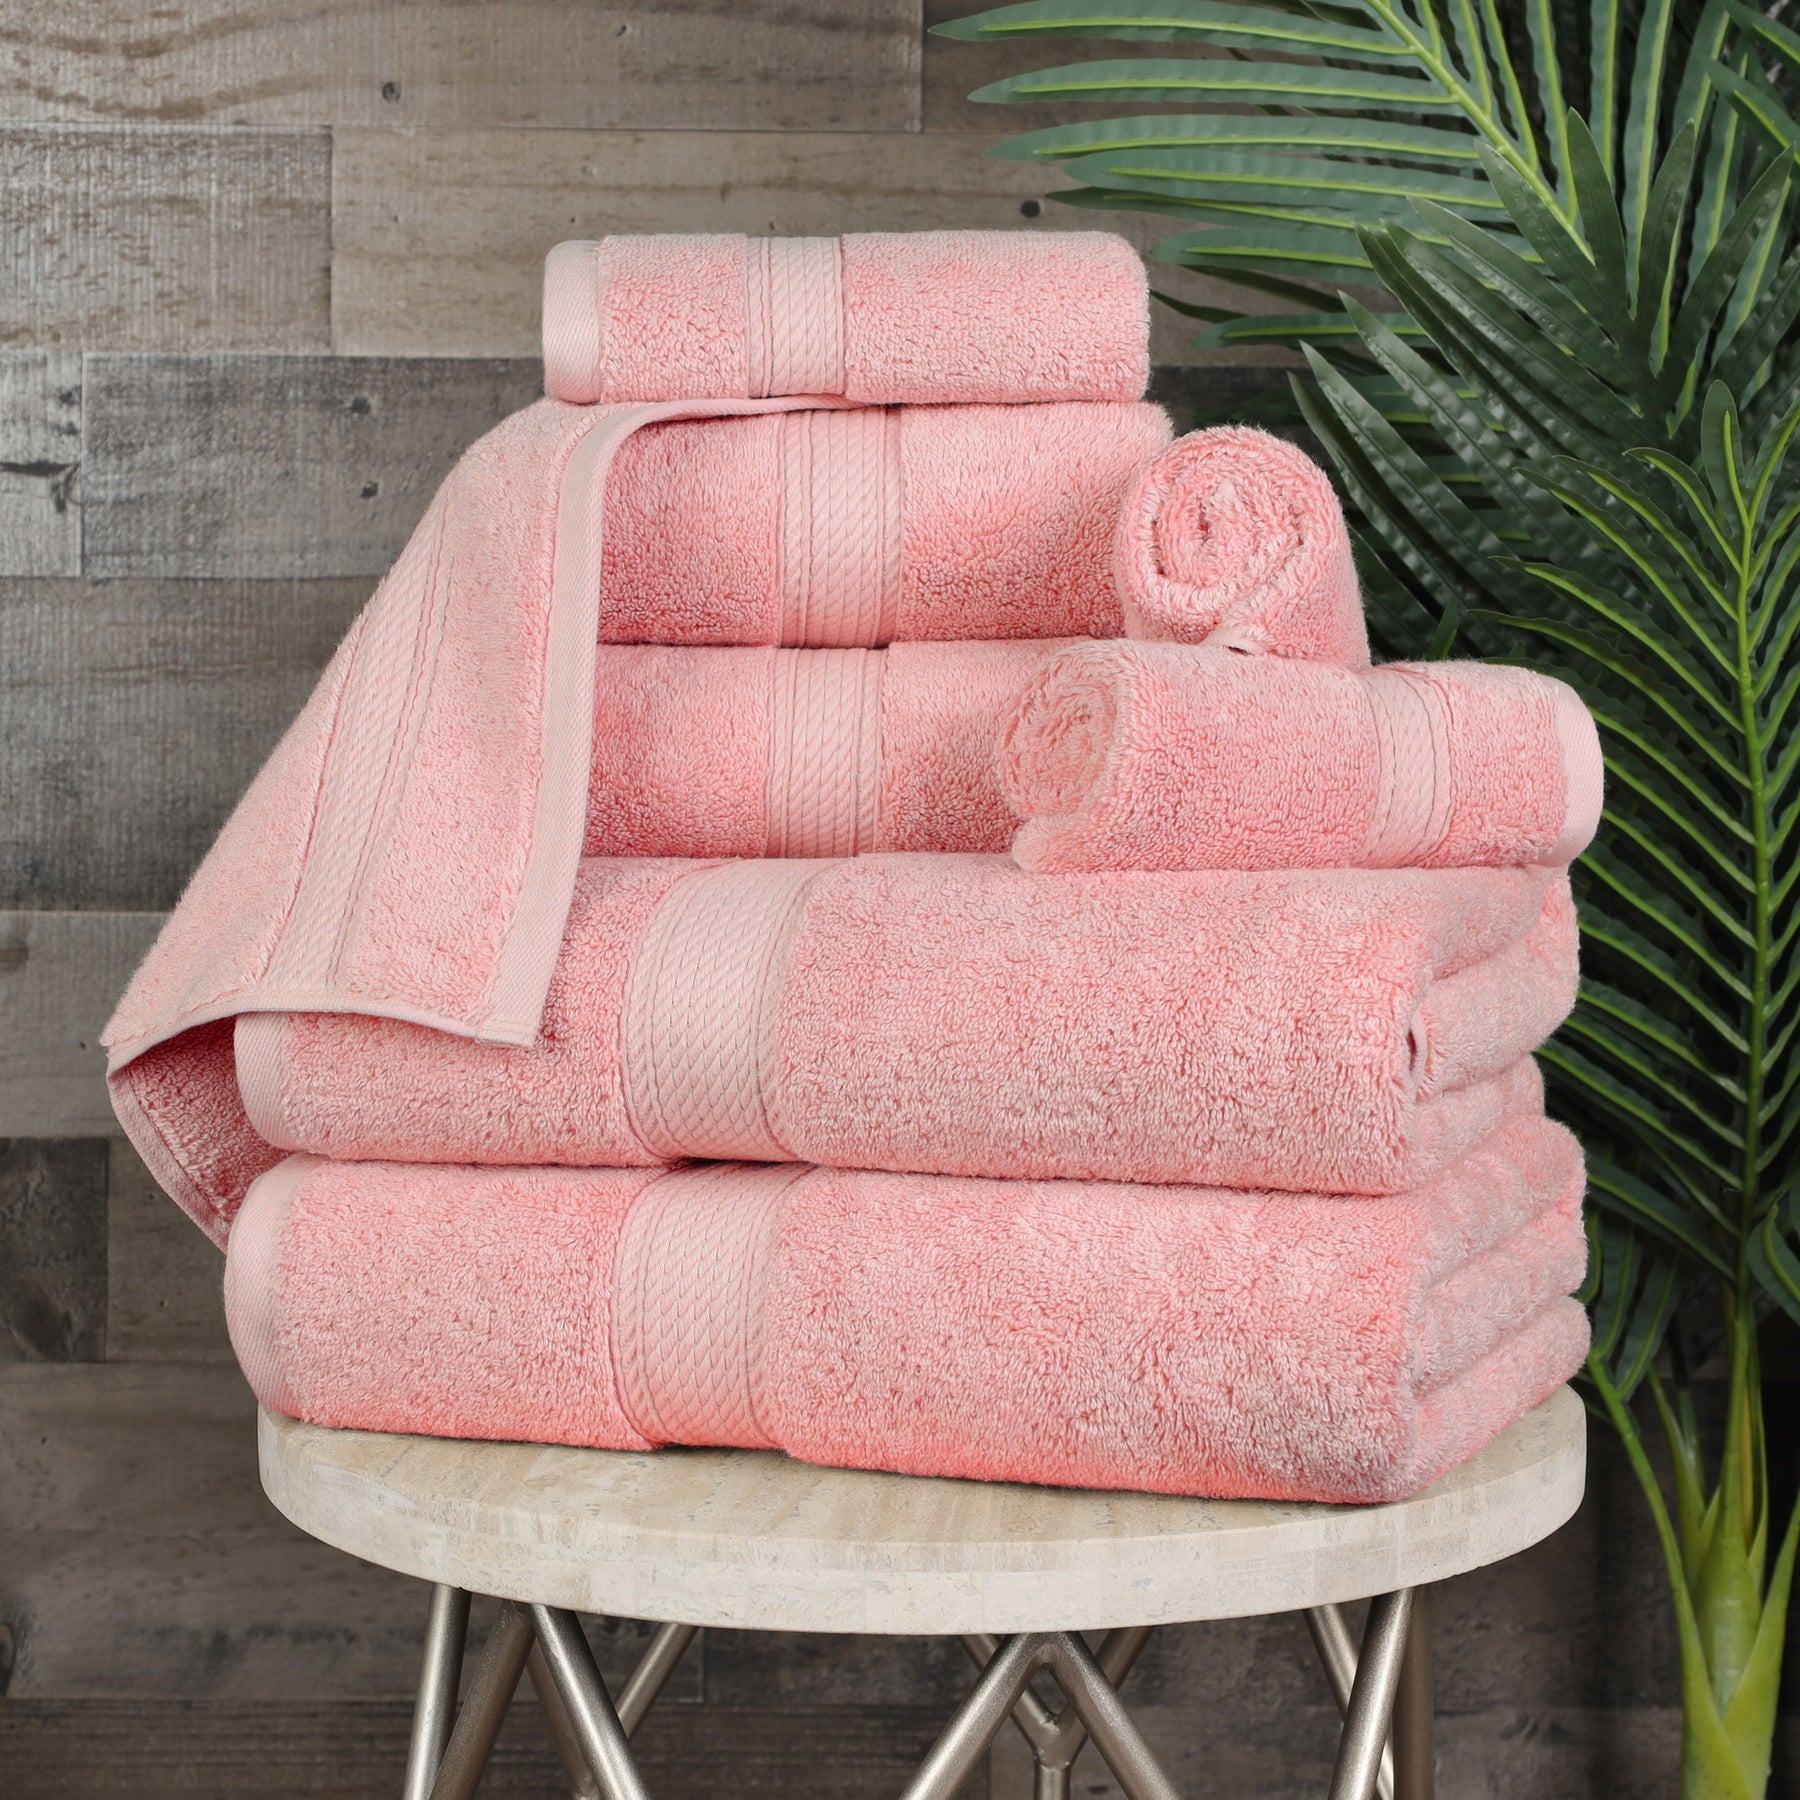 Egyptian Cotton Towel Set, Bathroom Absorbent, Solid Color, 70*140cm Beach  Towel Home,Luxury Hotel Hot Springs Gift Terry Towel - AliExpress